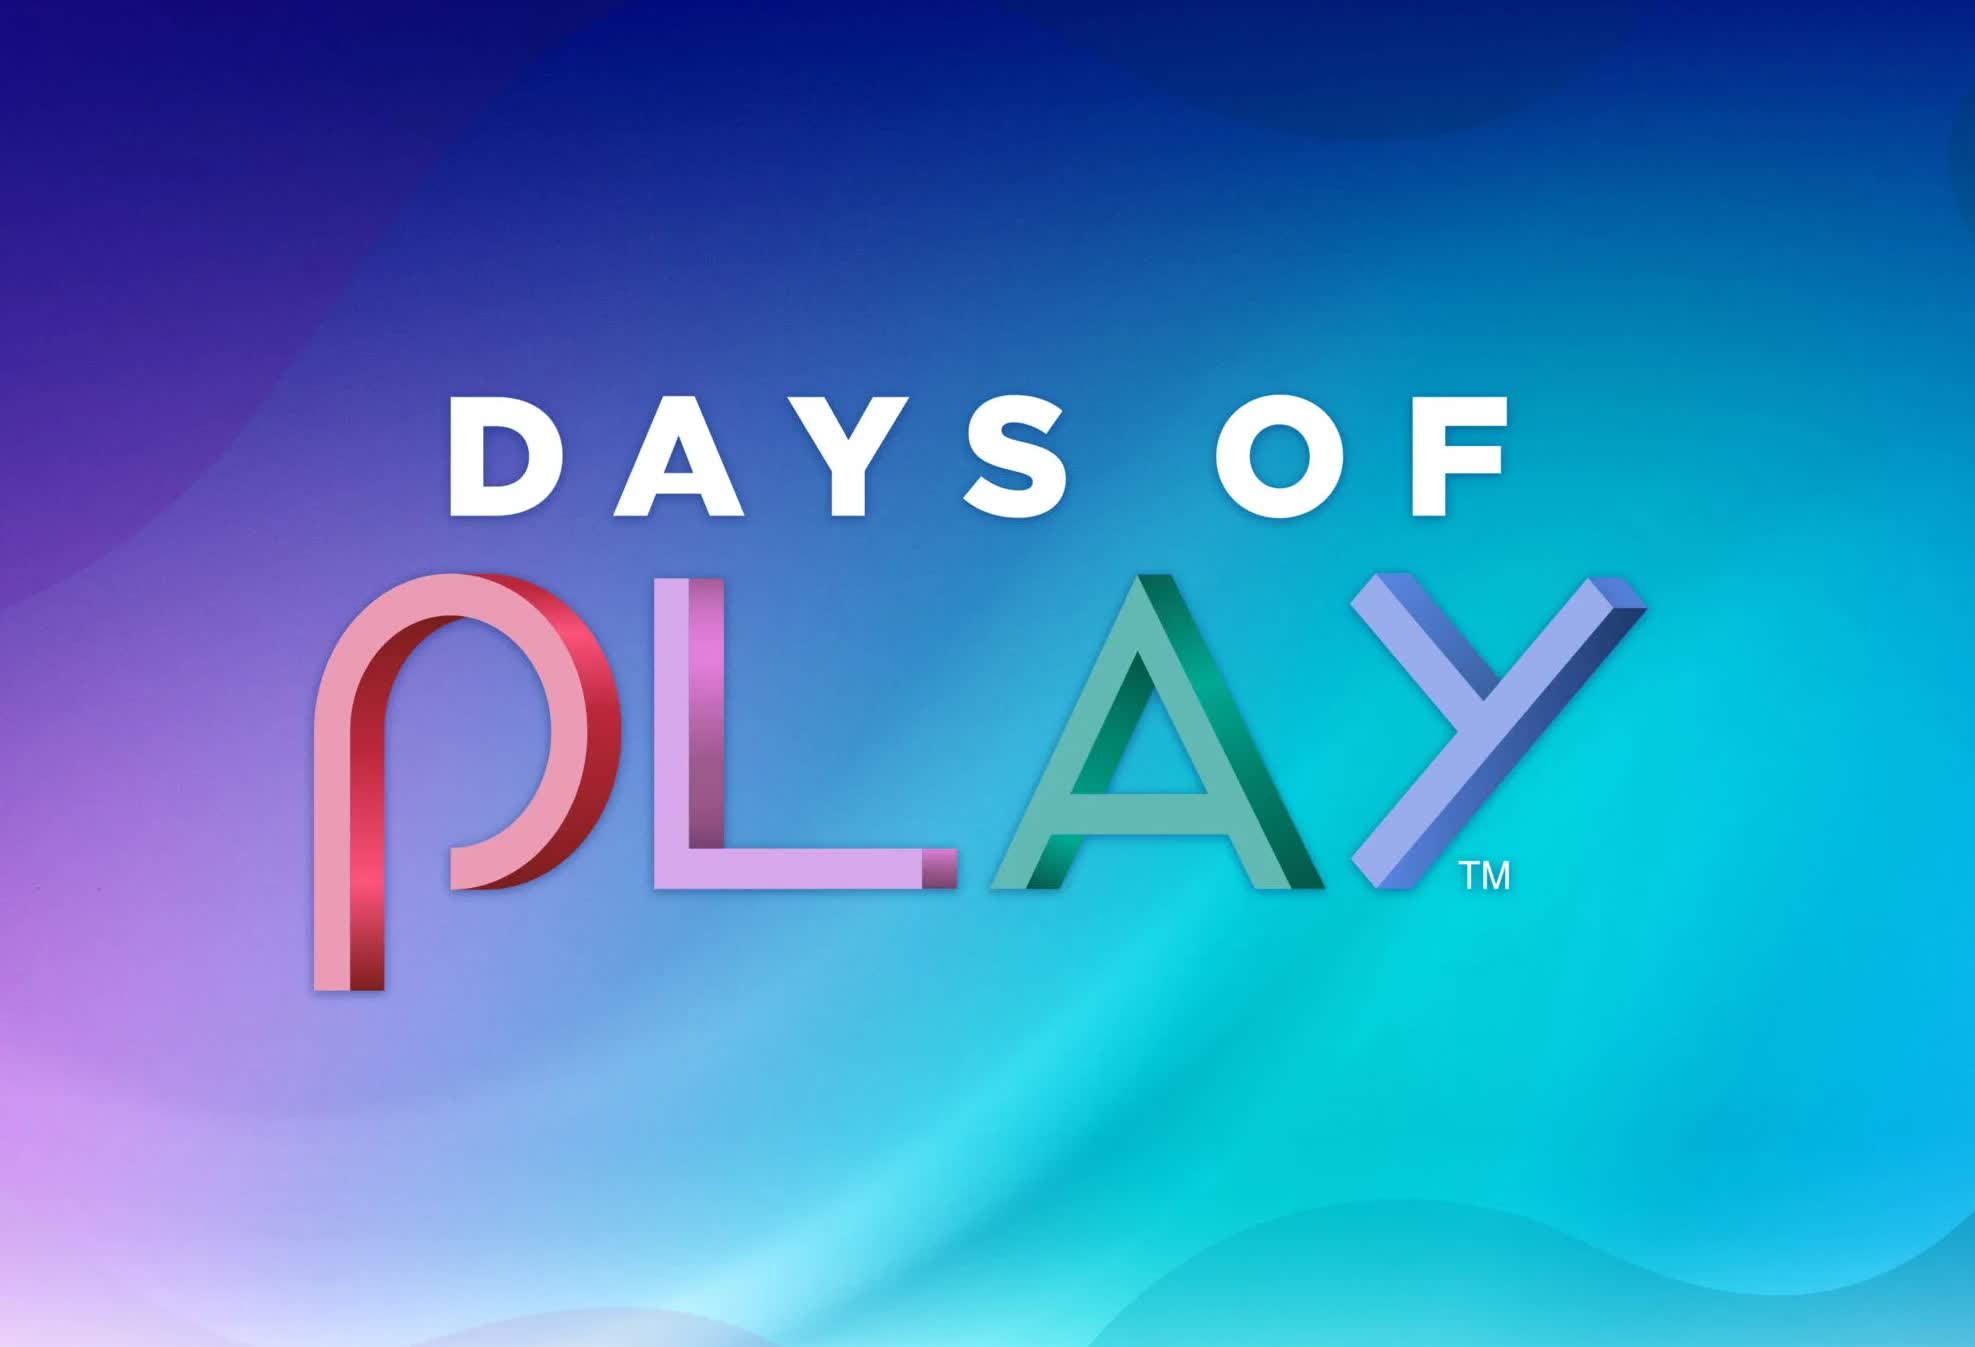 Sony's Days of Play 2022 sale is live with discounts on games, accessories and merch